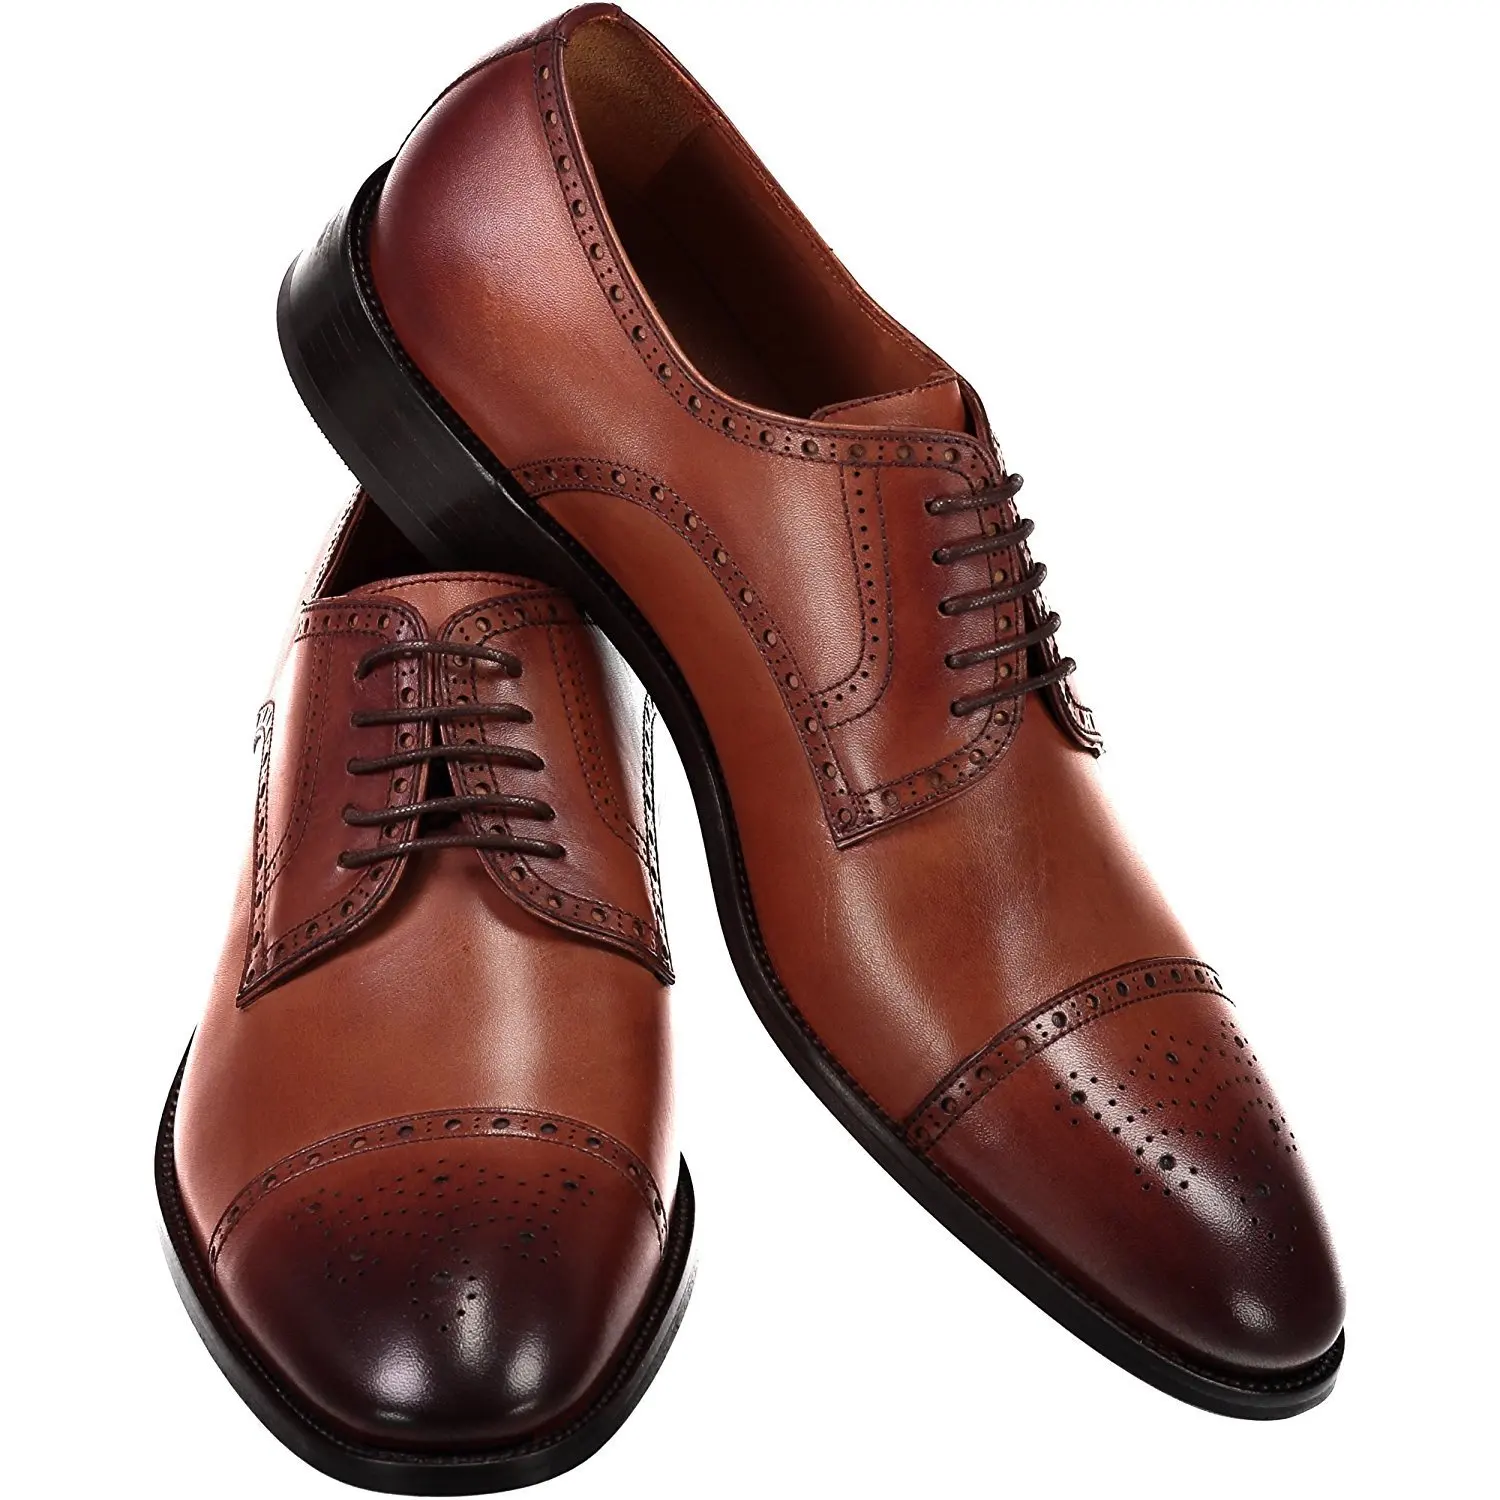 60 Sports Cheap suit shoes for All Gendre